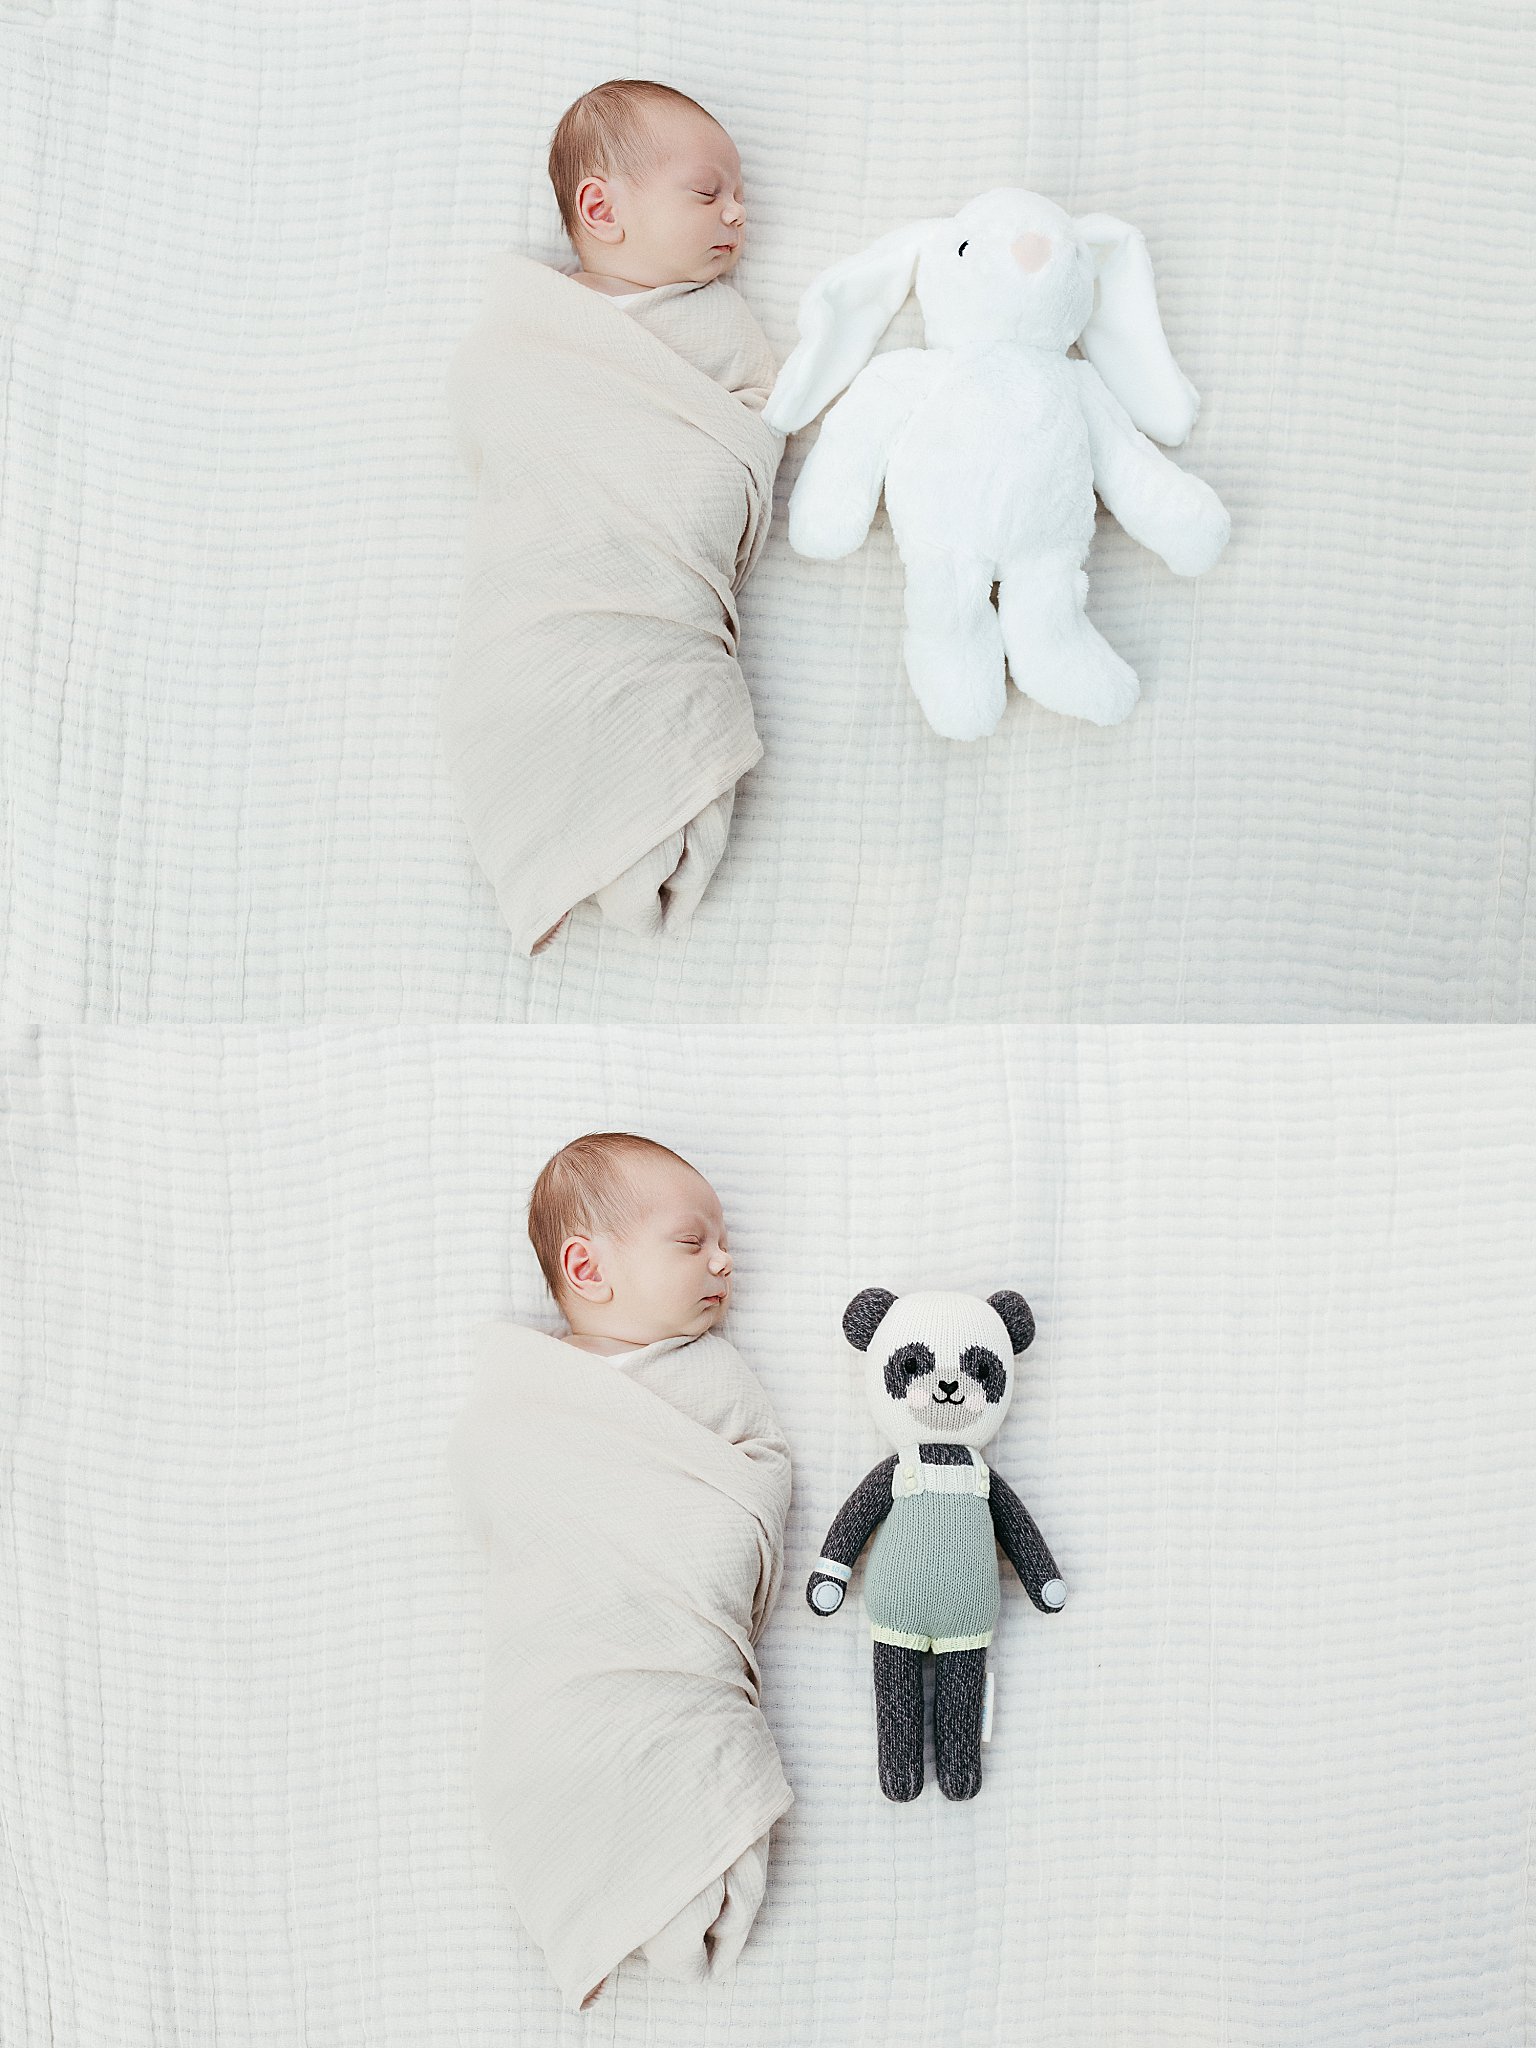 infant lays next to stuffed animals by Virginia Beach photographer